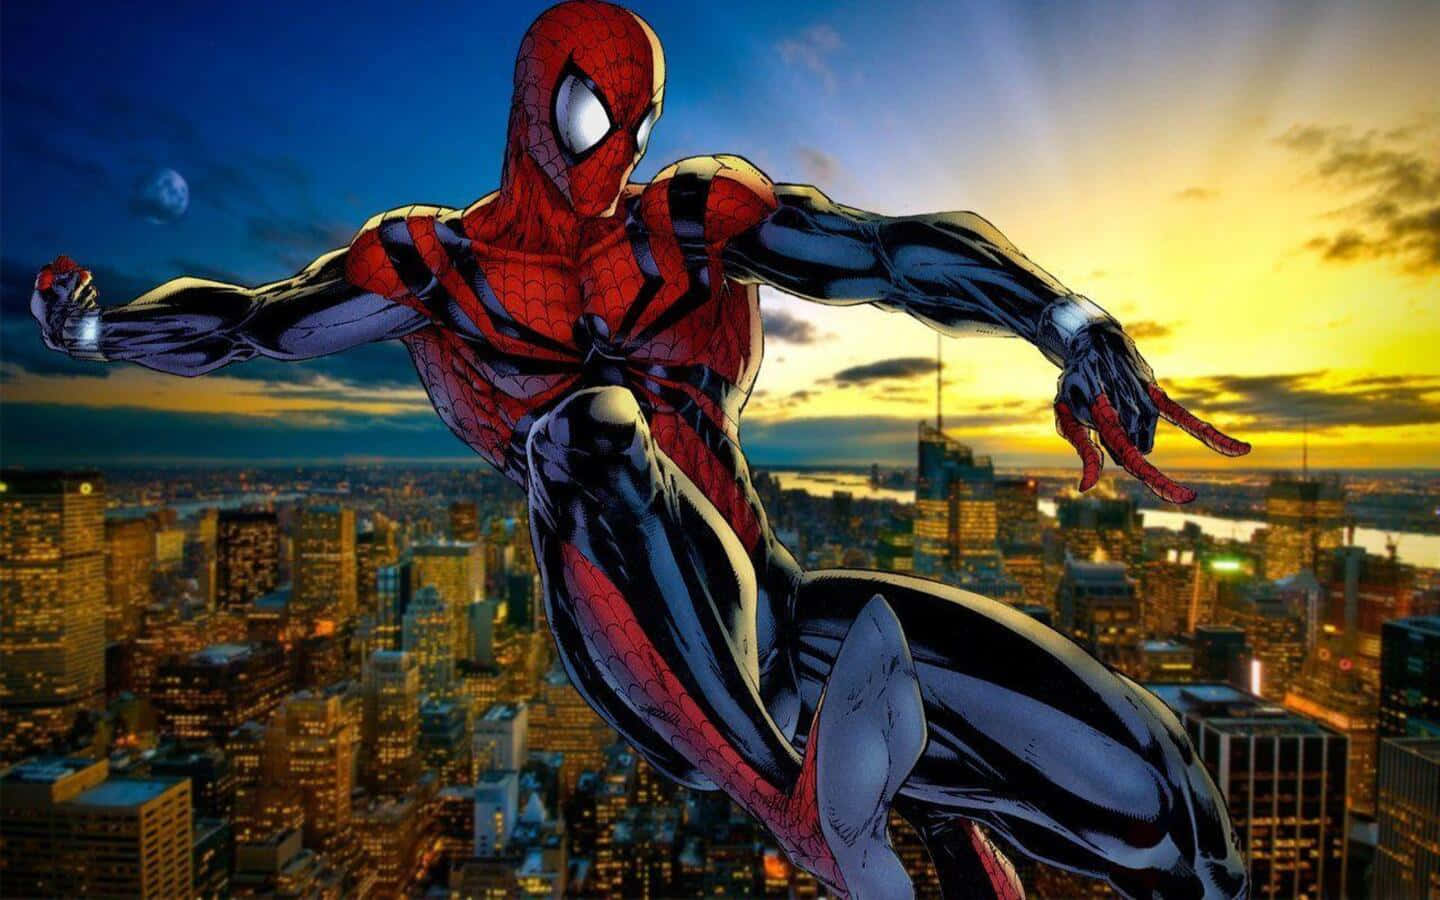 Spider-geddon Unleashes its Web of Heroes in an Epic Battle Wallpaper